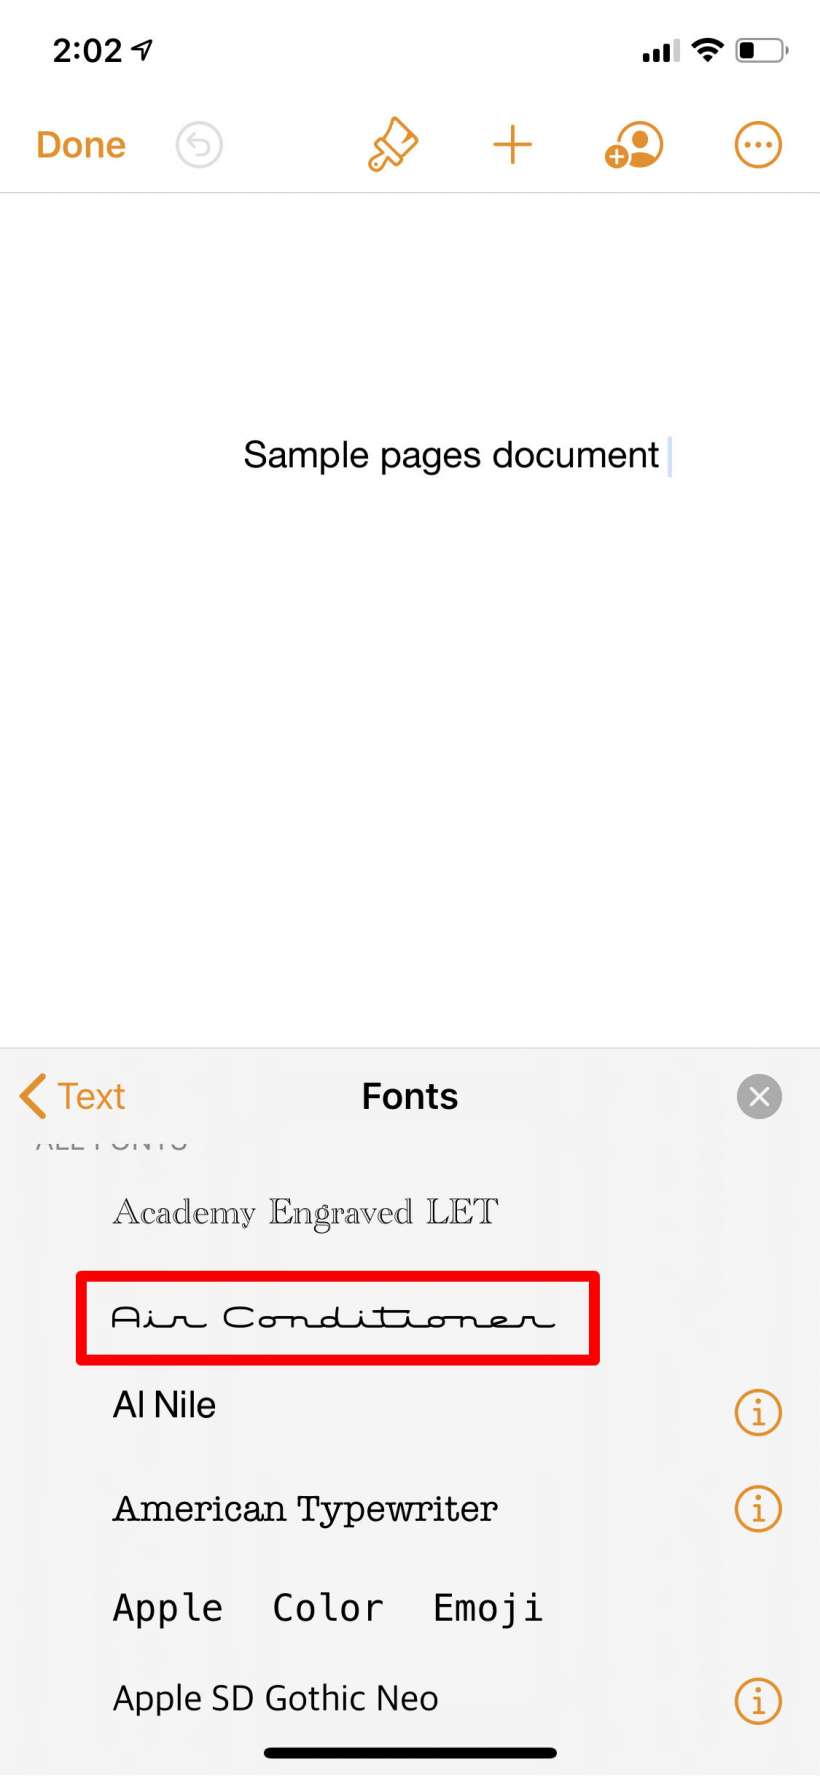 How to install and uninstall fonts on iPhone and iPad using the font manager.